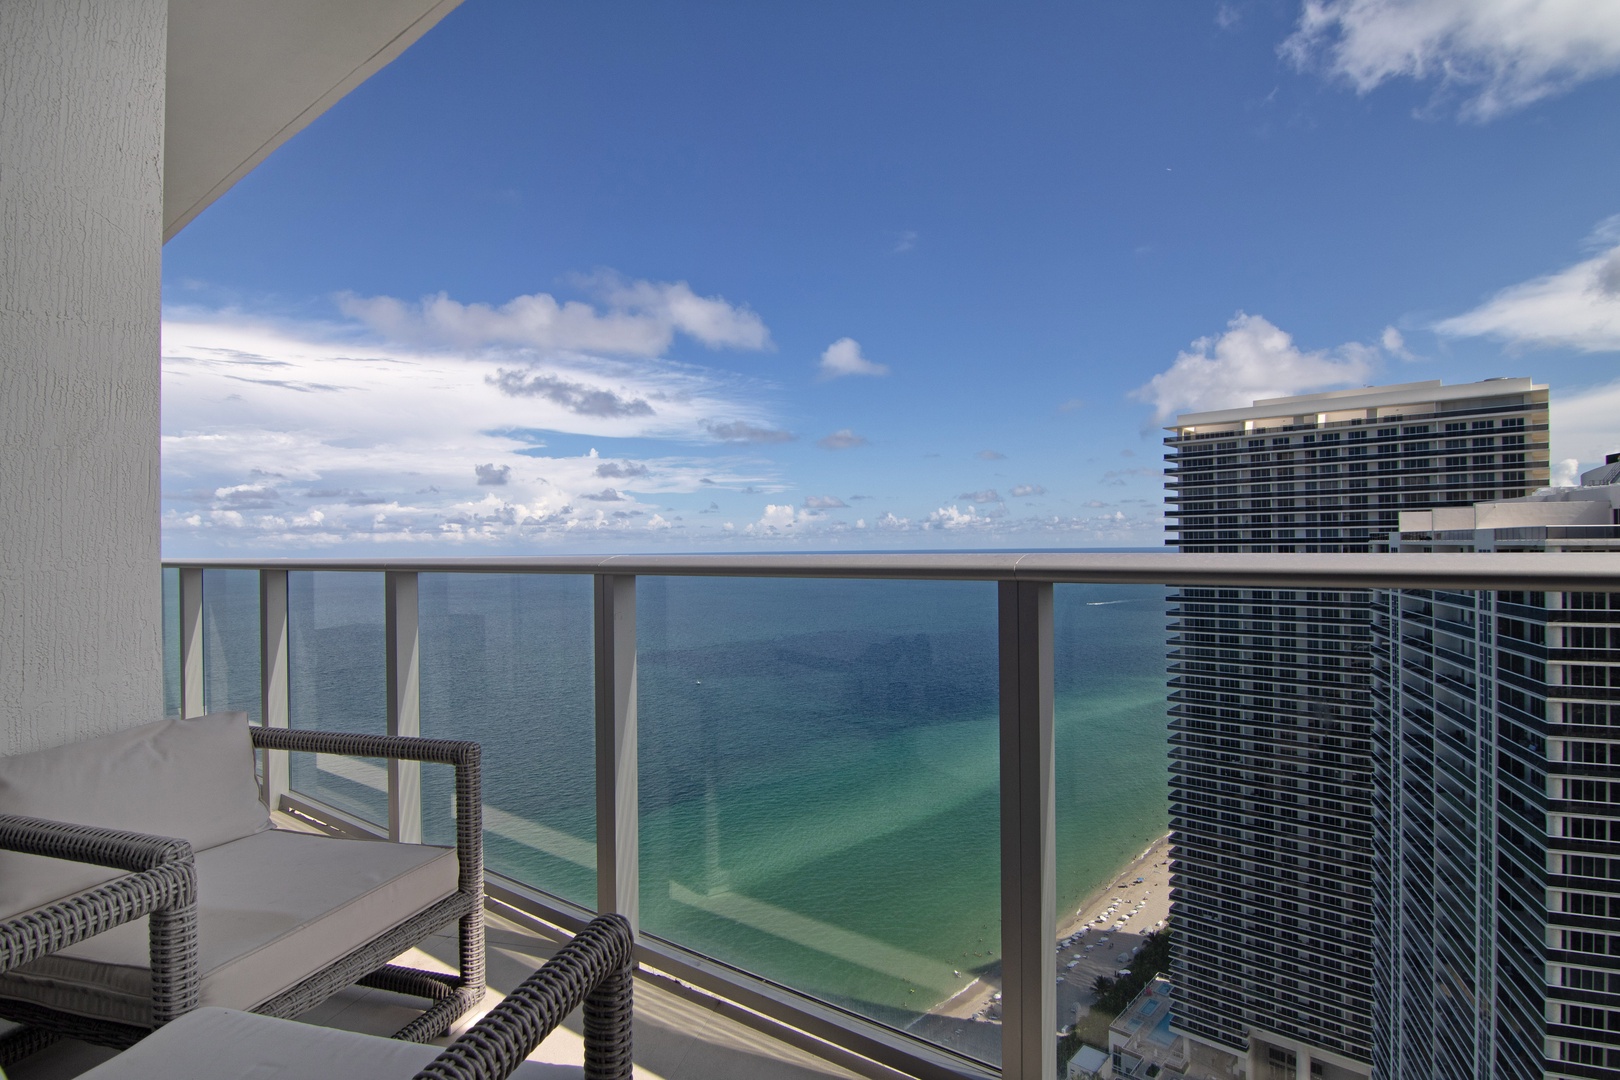 Enjoy dazzling ocean views from your very own private balcony